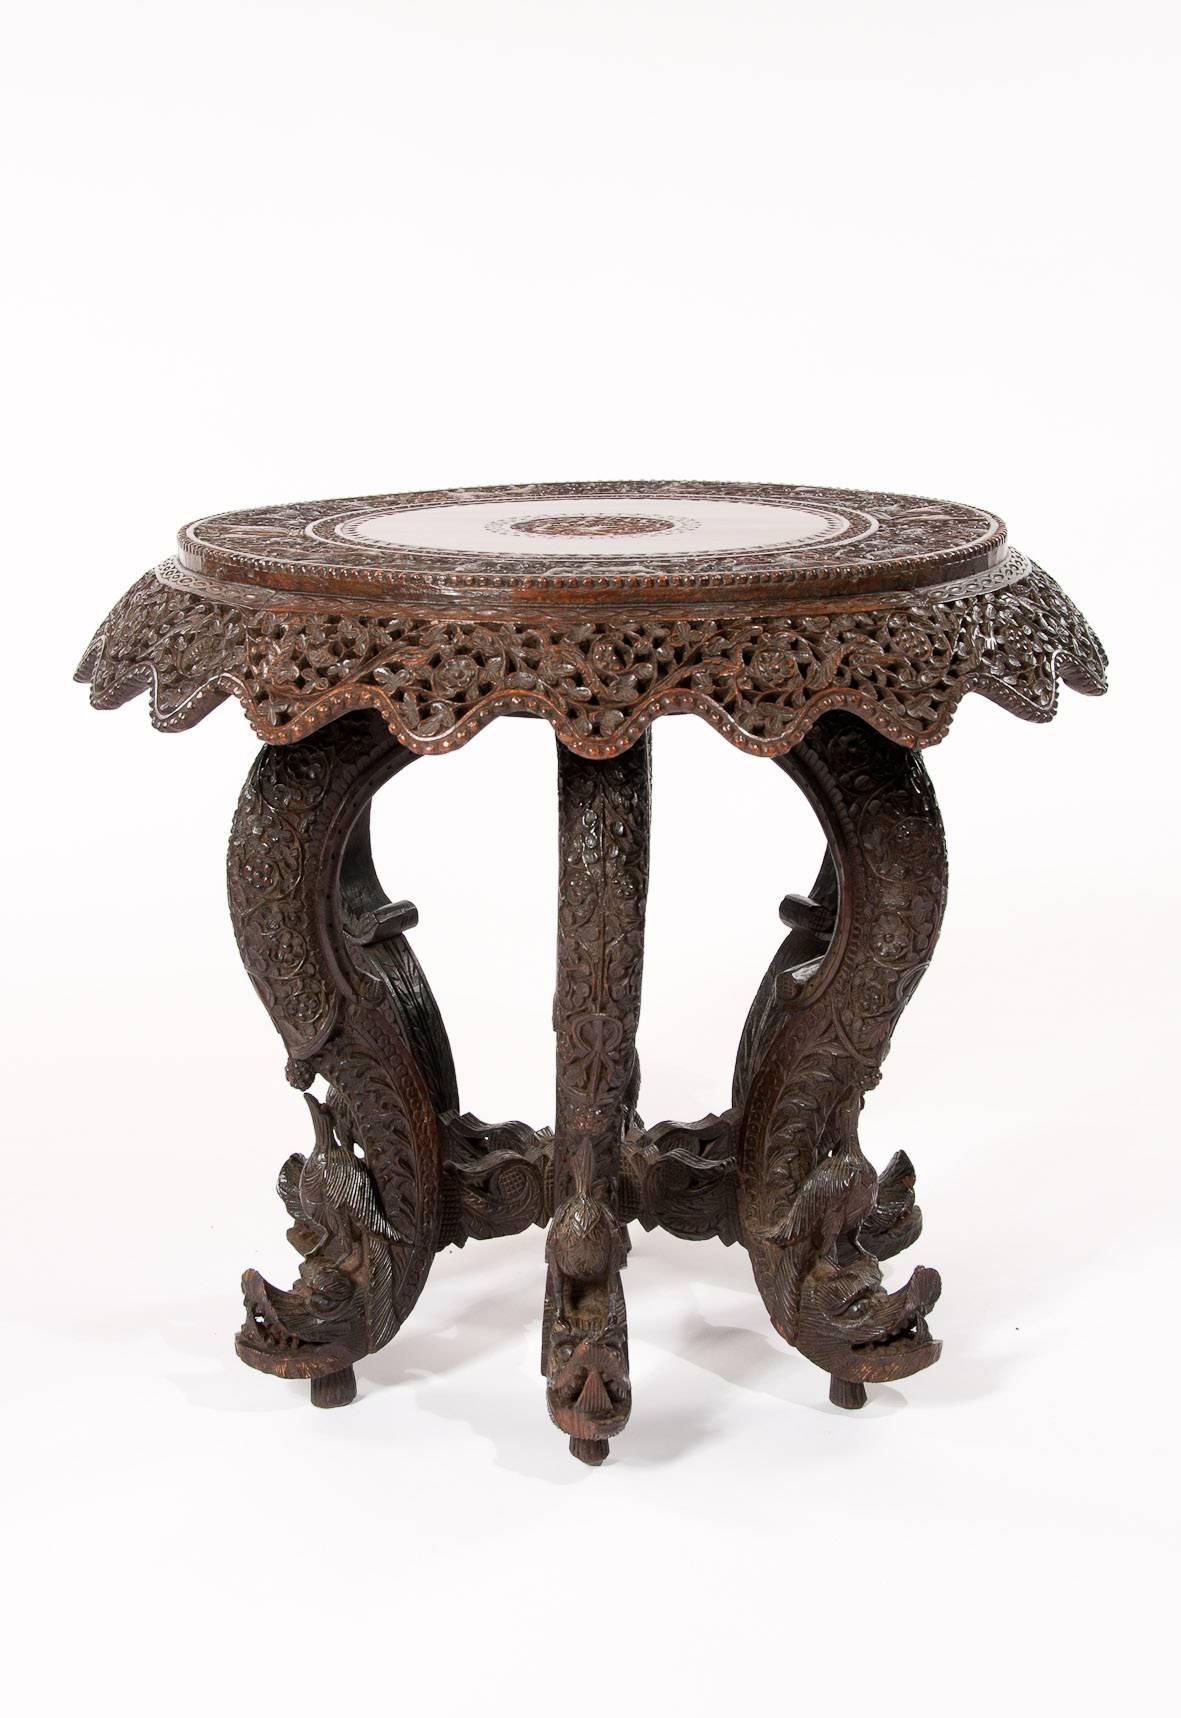 An impressive 19th century Anglo-Indian carved revolving occasional table.
A highly decorative and finely carved mid-19th century teak revolving occasional table or coffee table on a six legged base.
Extremely well carved and in excellent